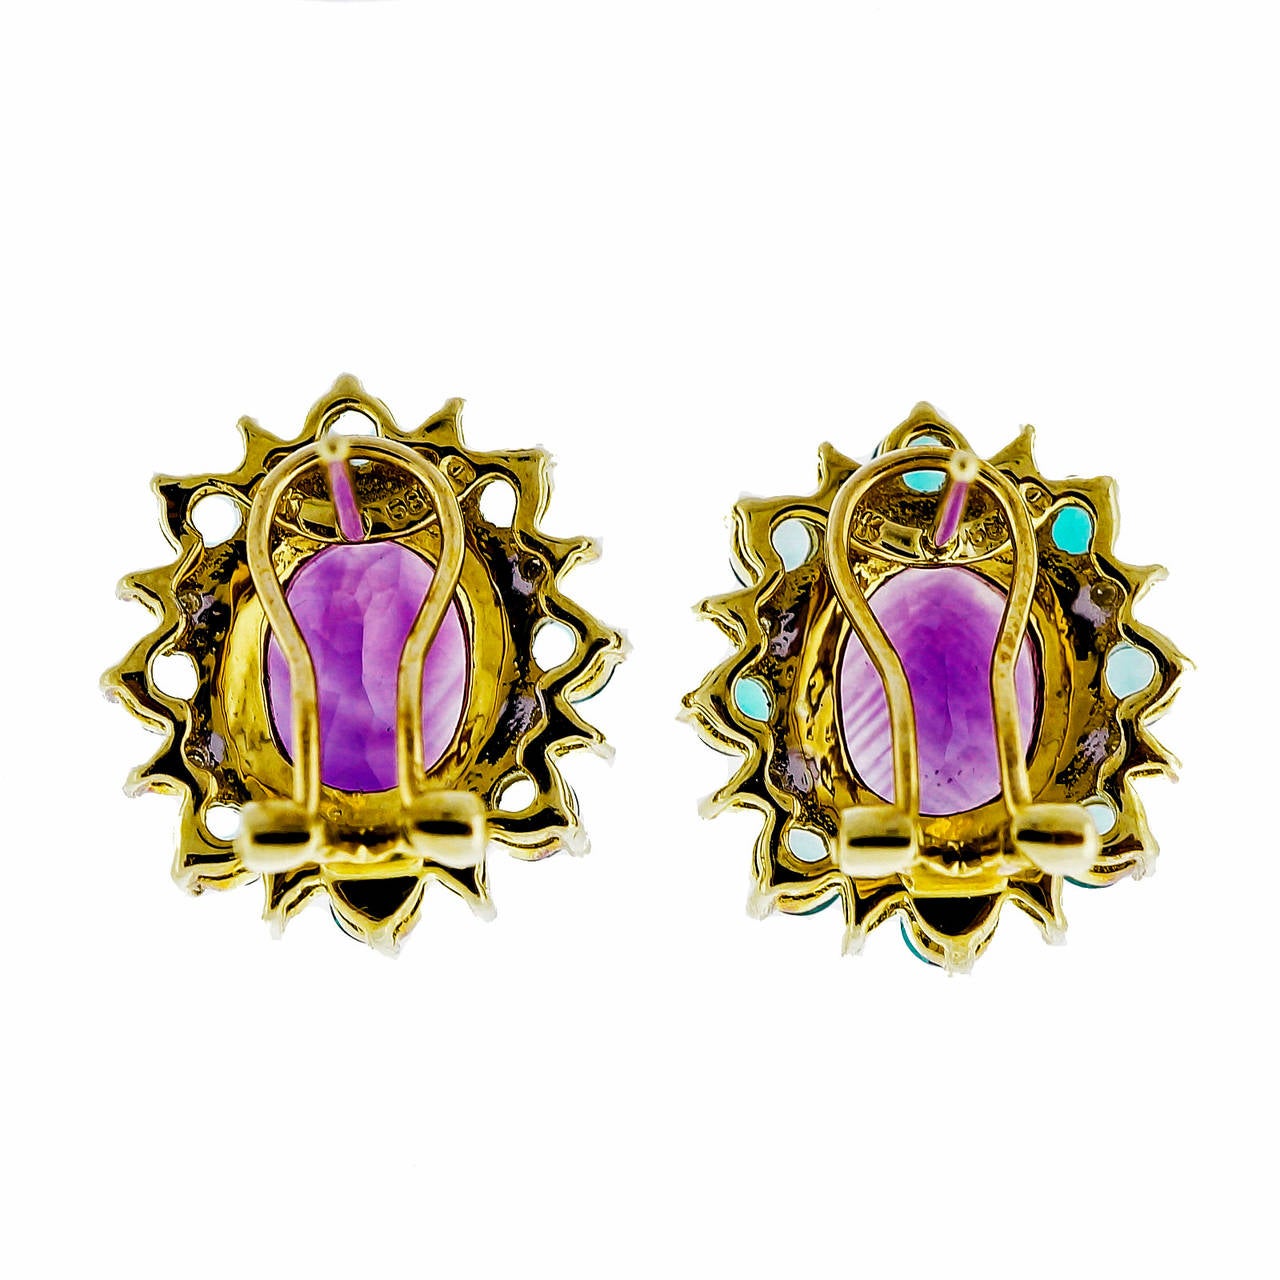 Classic and button style clip post earrings with bright color combination of Amethyst, blue Topaz and diamond. Circa 1980.

2 oval purple Amethyst, approx. total weight 4.80cts
16 round blue Topaz, approx. total weight 1.75cts, VS
16 round full